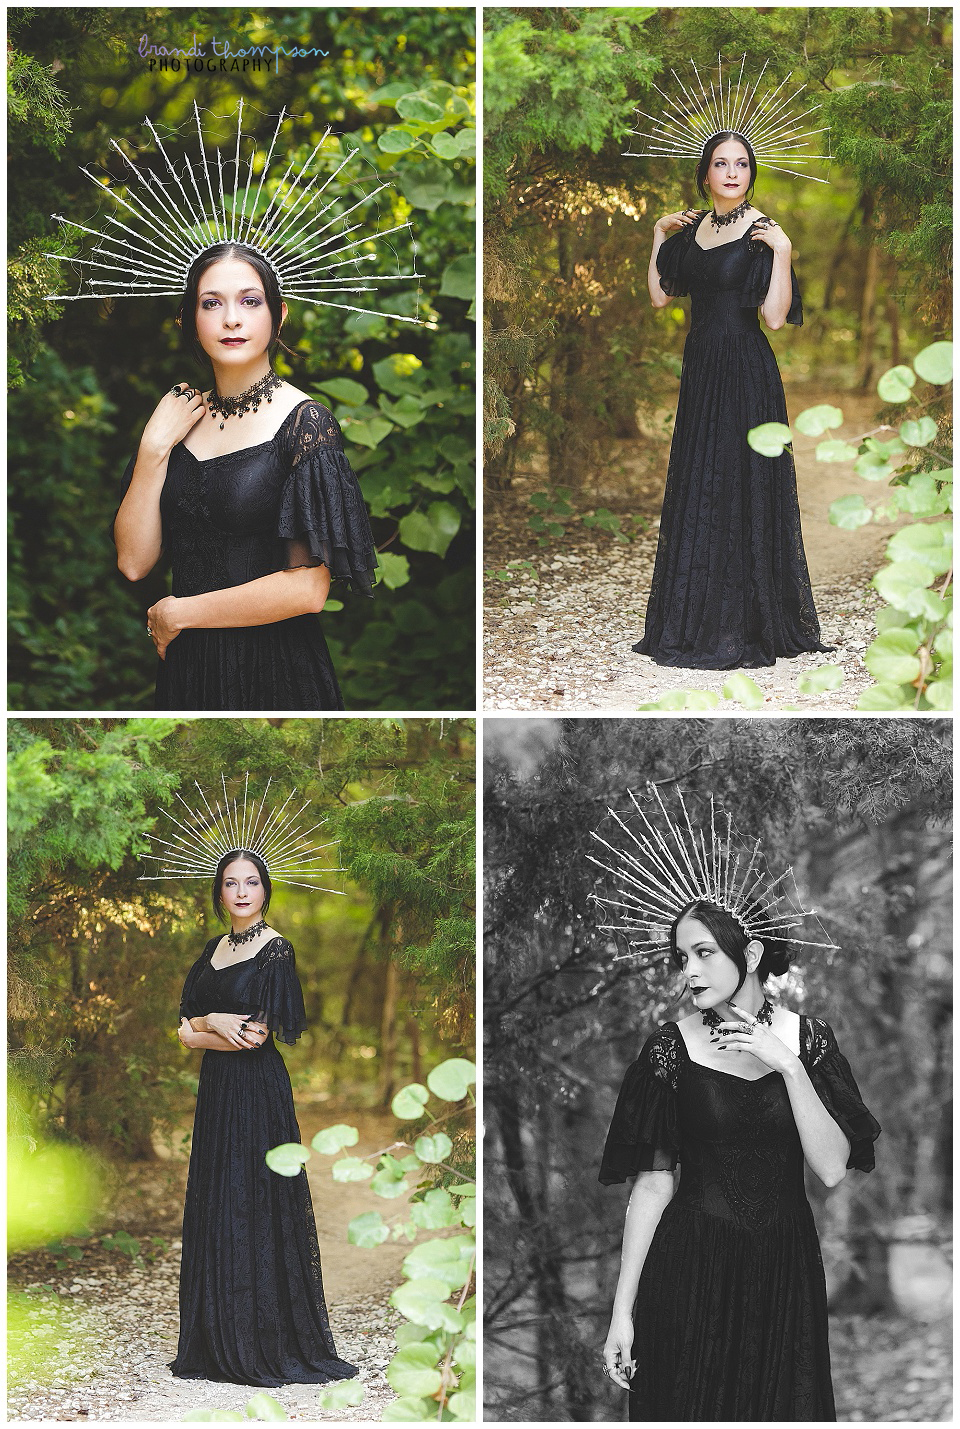 outdoor photos of 30th birthday session with a goth theme, a long, lacy black dress and silver starburst style crown